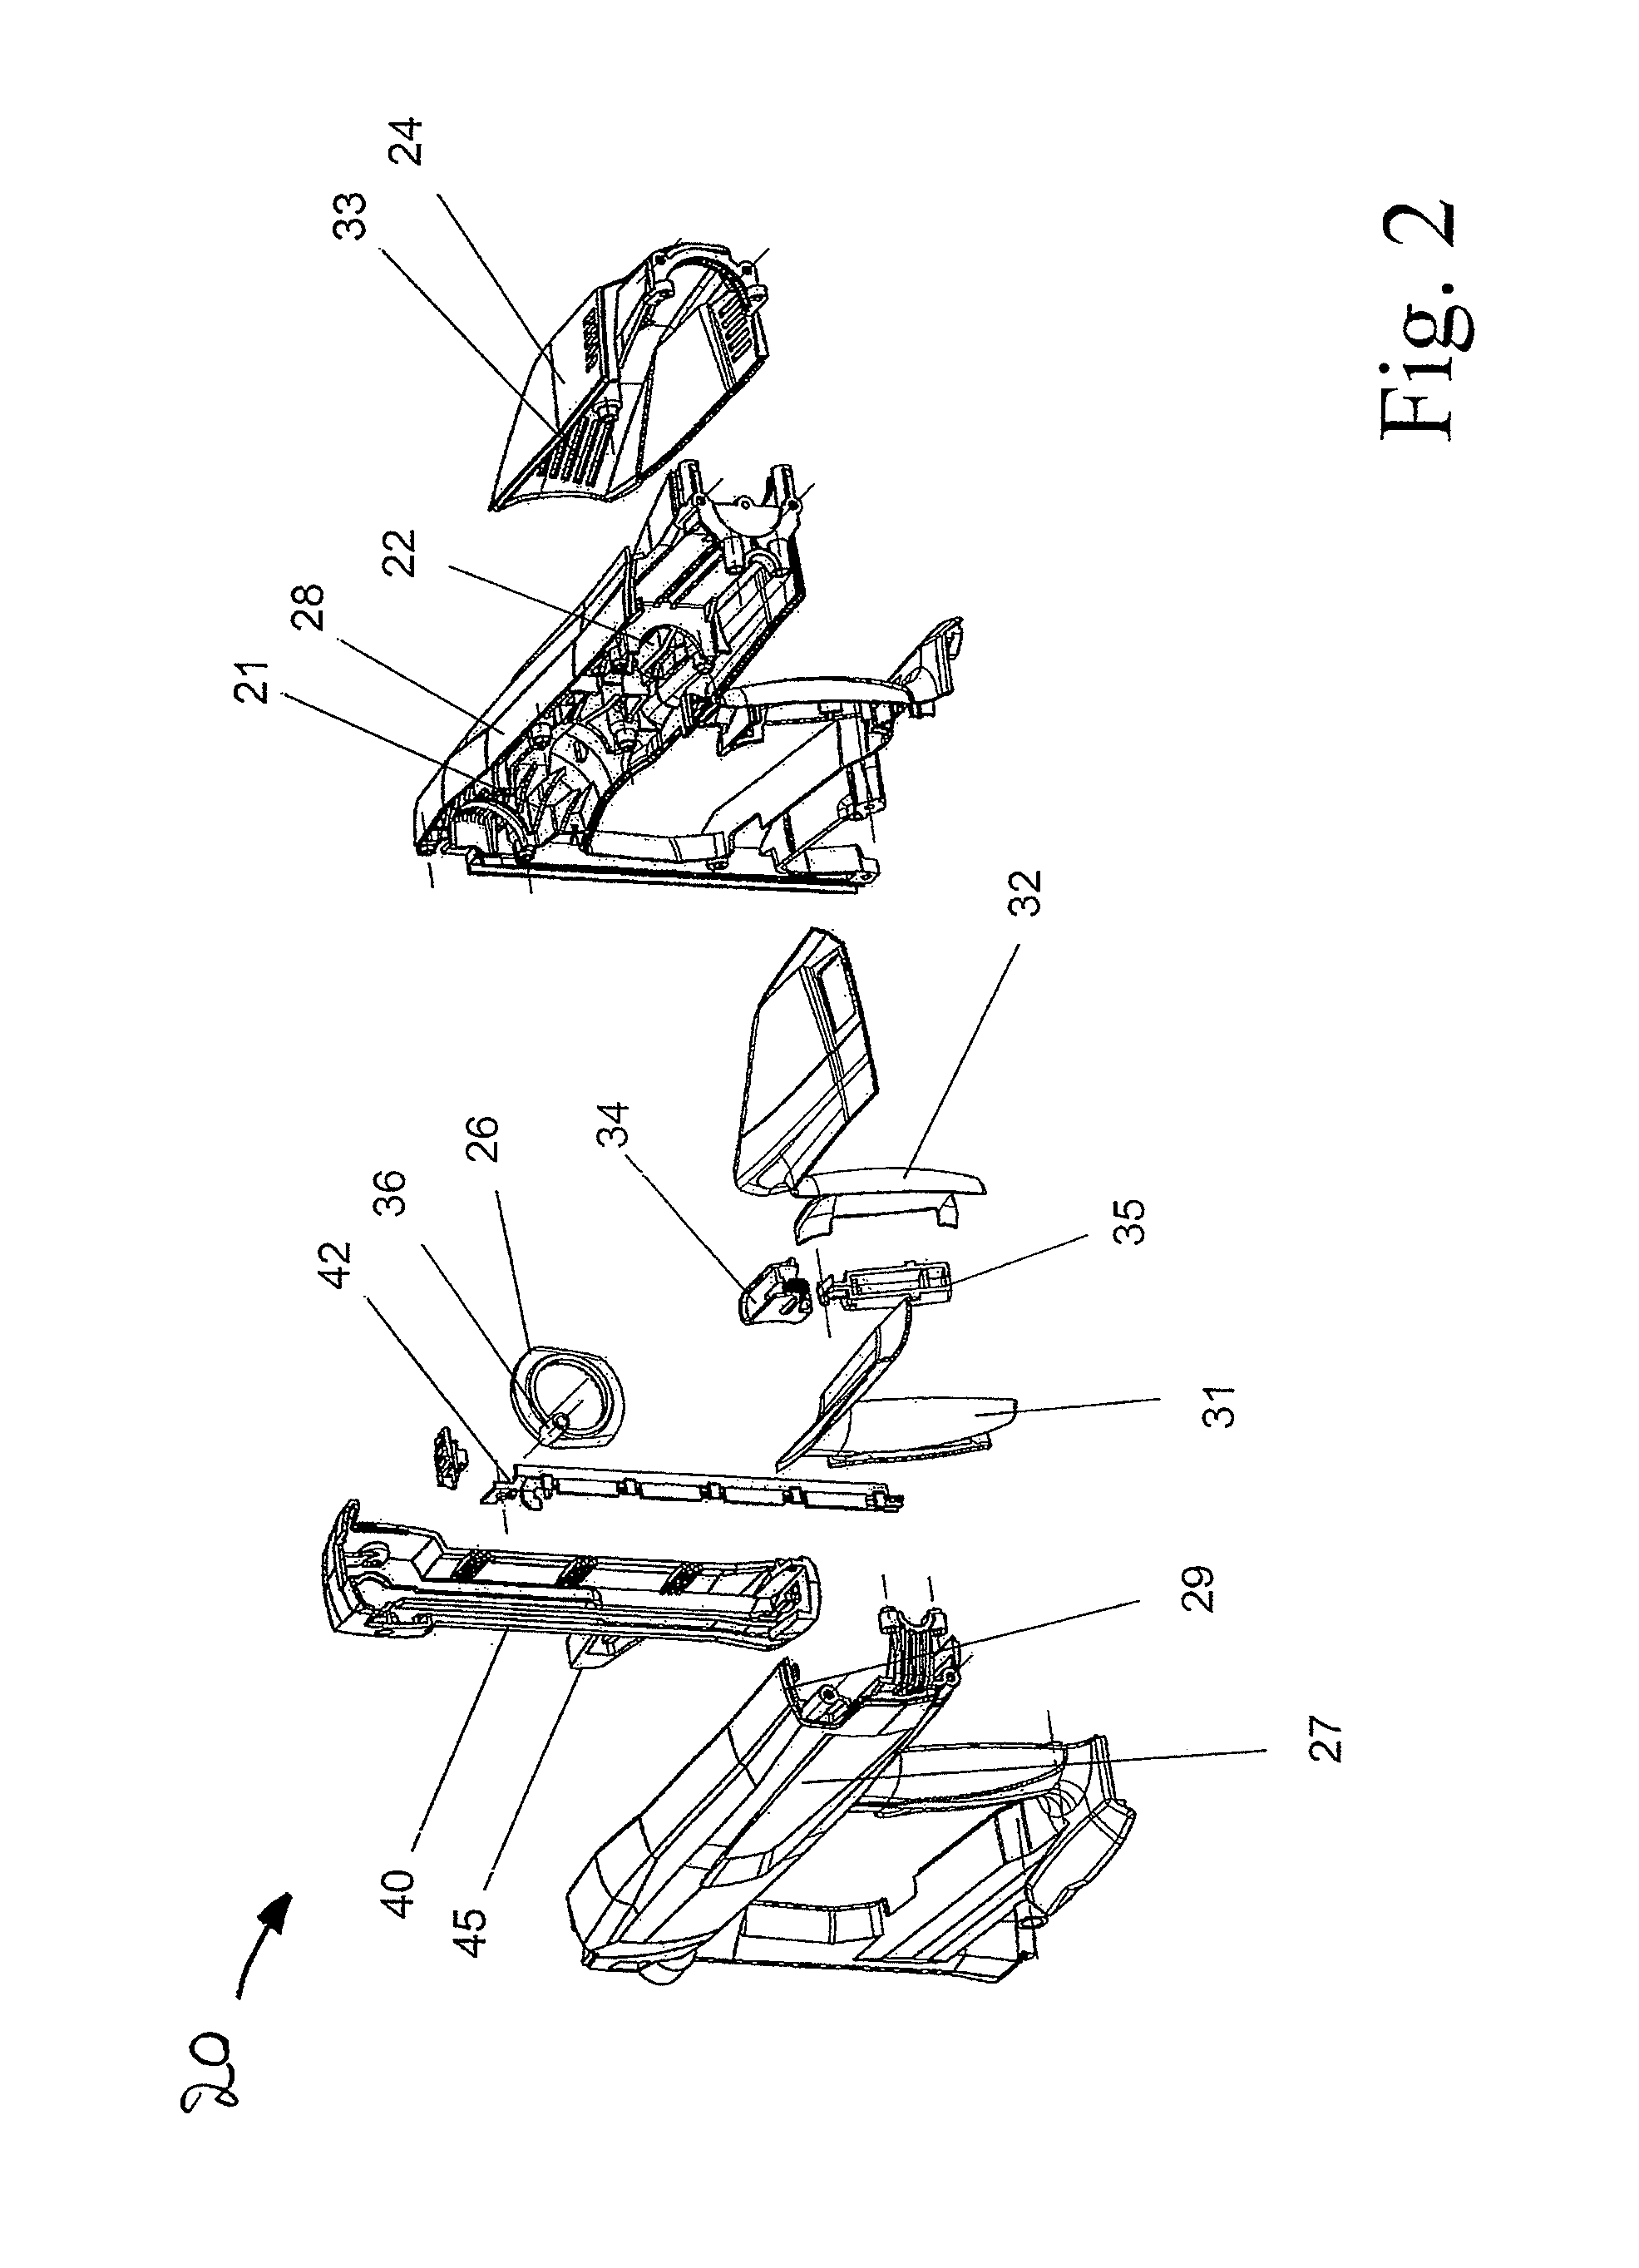 Driving device